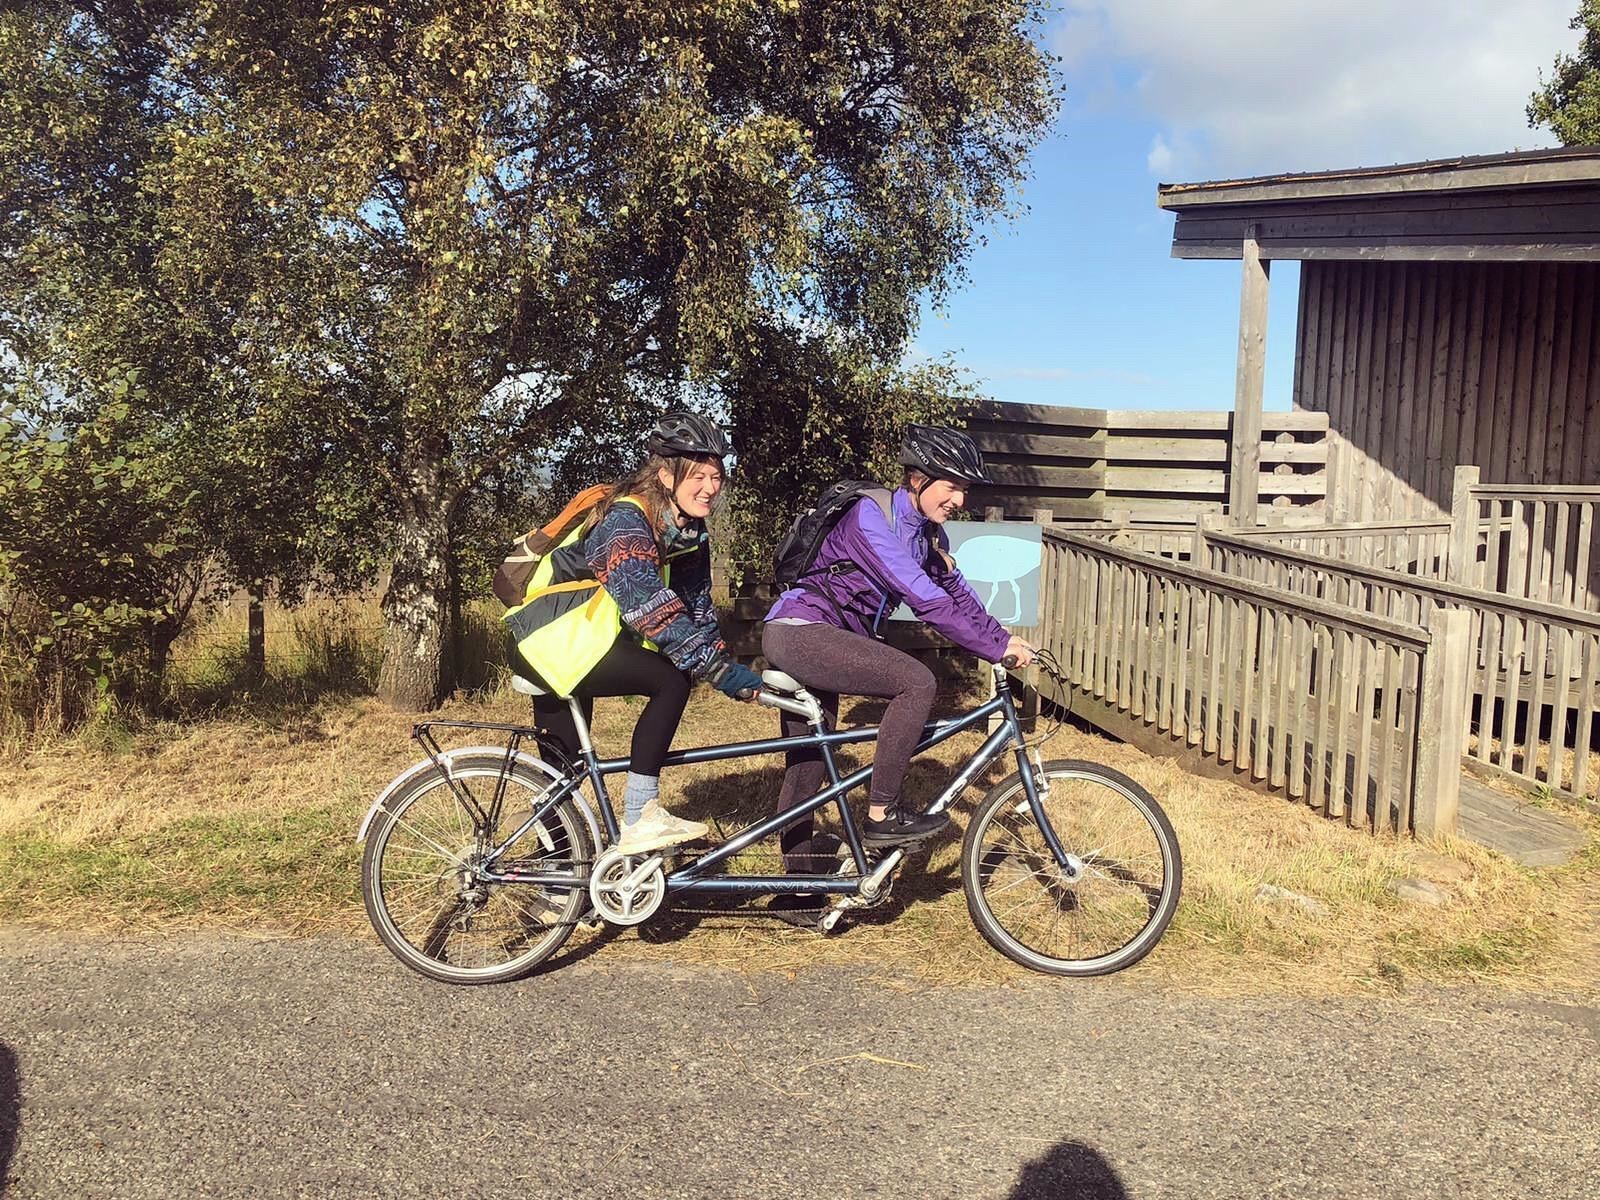 The two women completed the final miles on a tandem.